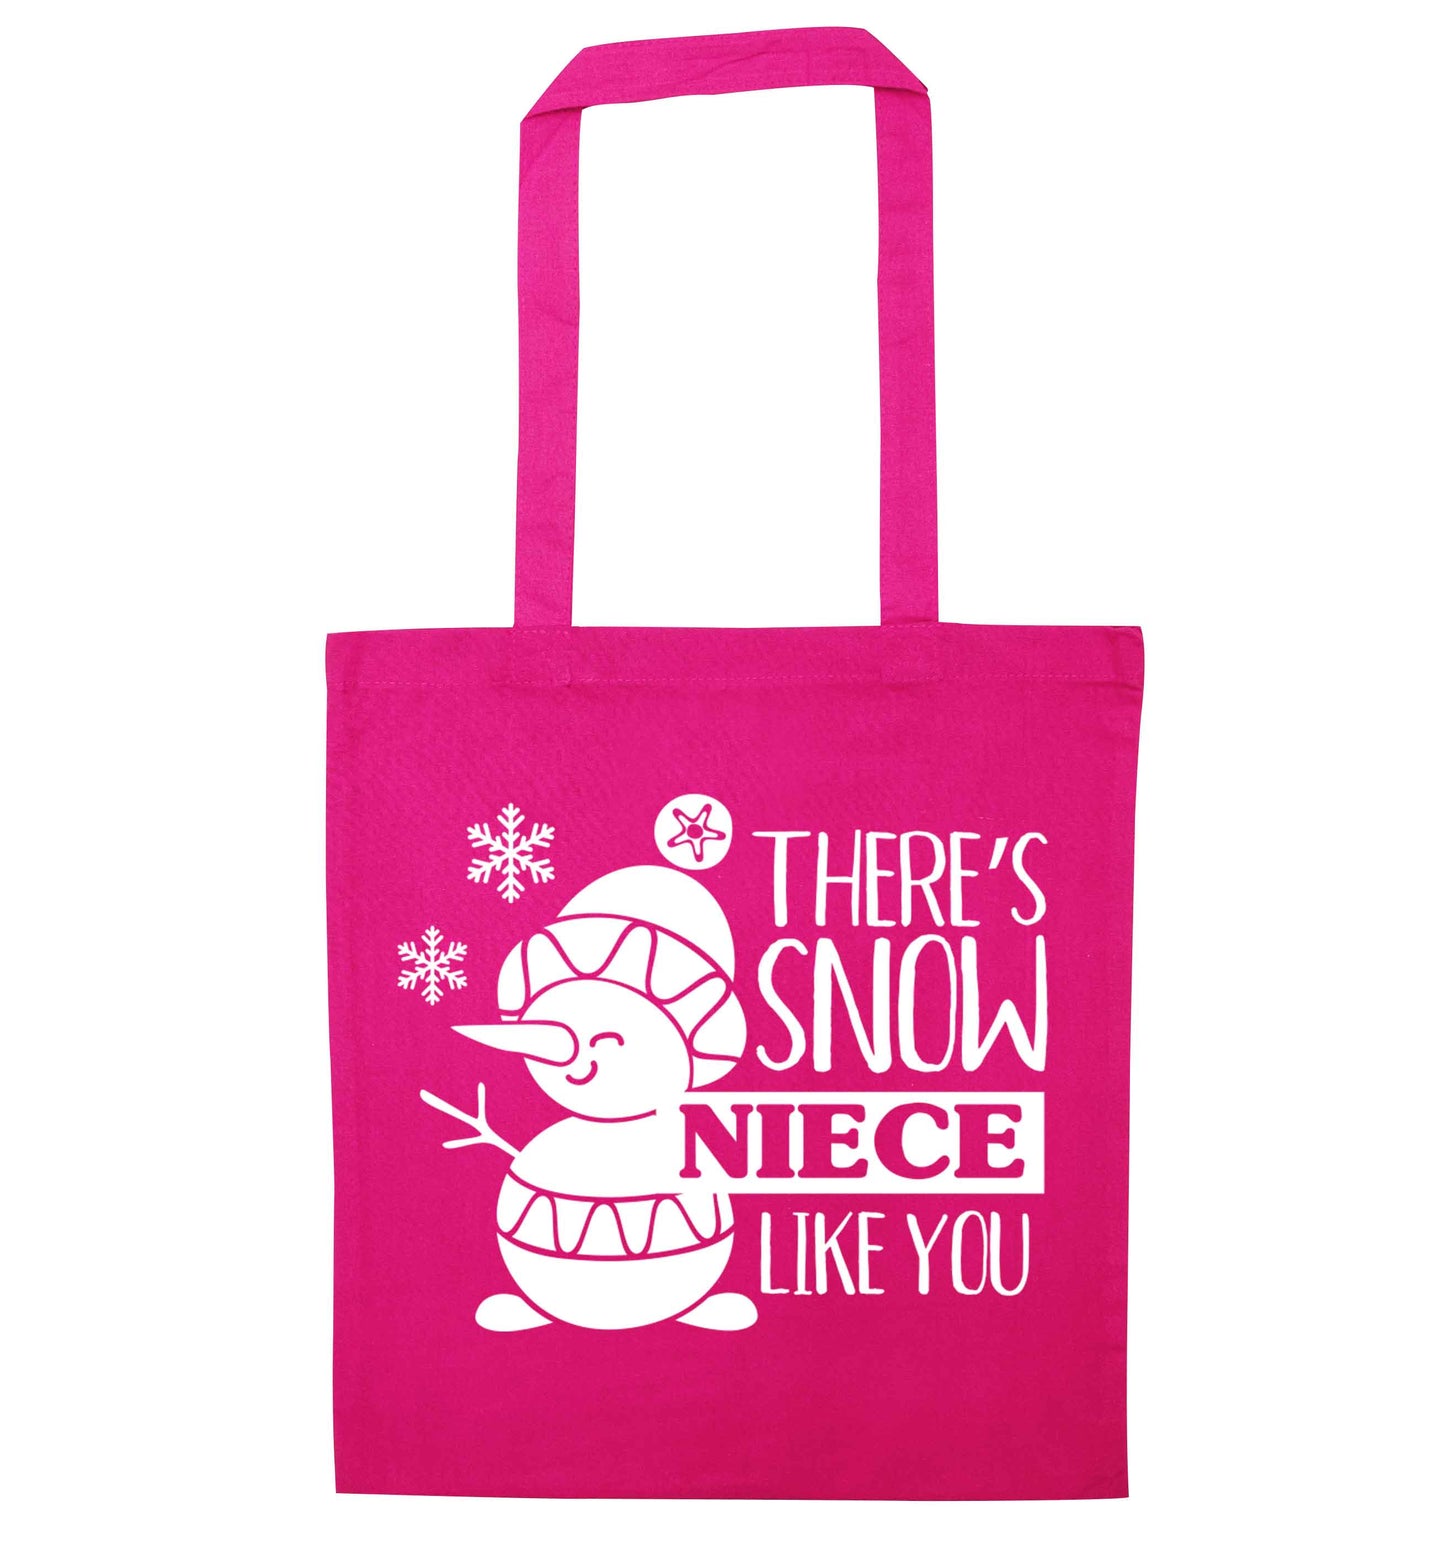 There's snow niece like you pink tote bag